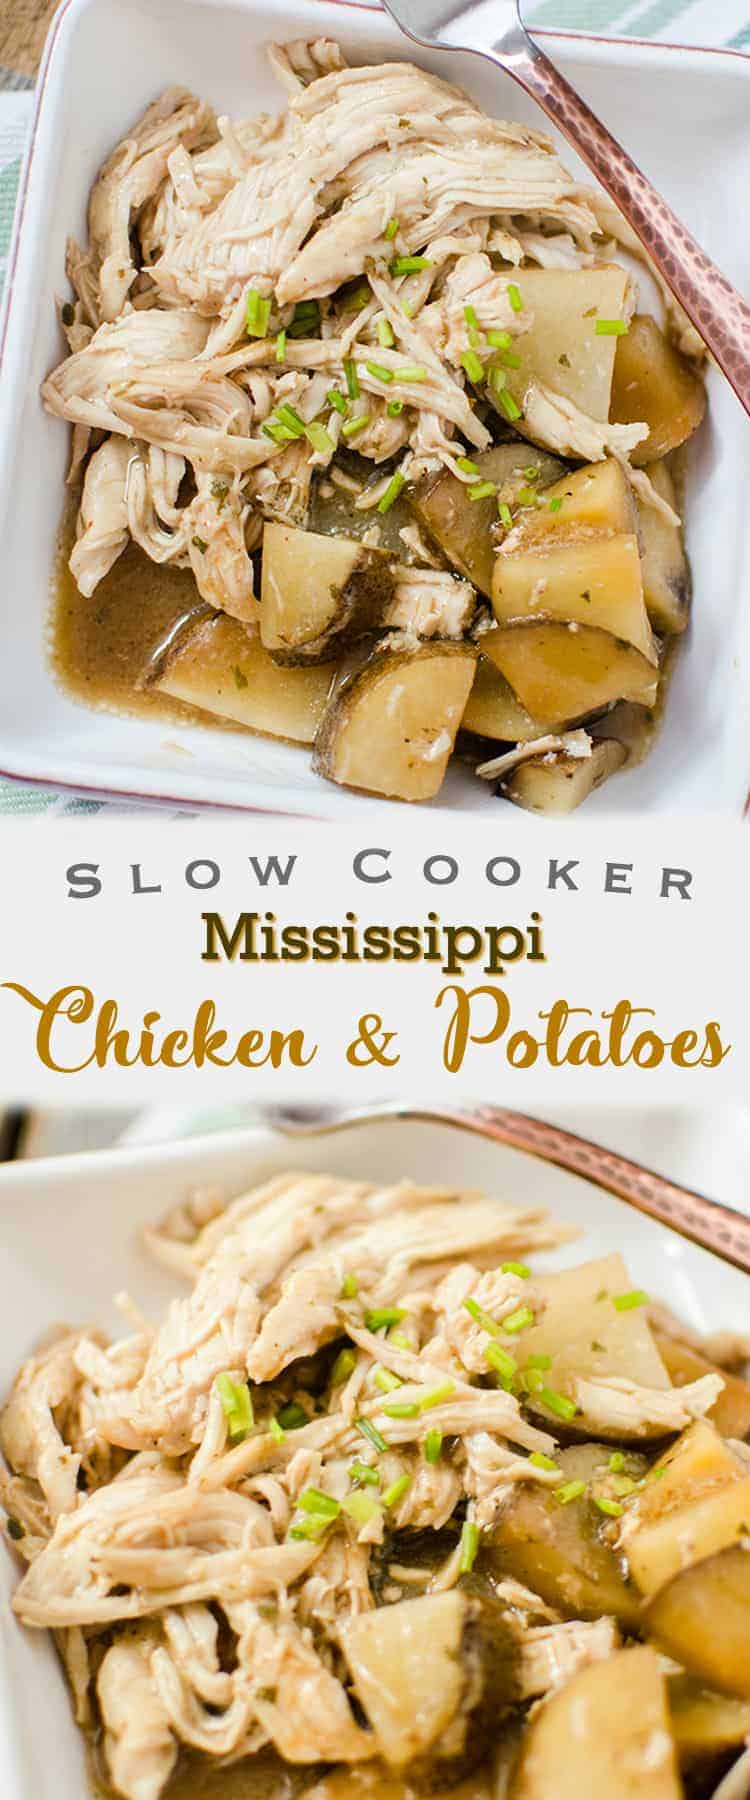 The star ingredients of this Slow Cooker Mississippi Chicken and Potatoes recipe is butter, ranch dressing mix and au jus - such a tasty flavour combination. I love it because it's a true delicious slow cooker meal.